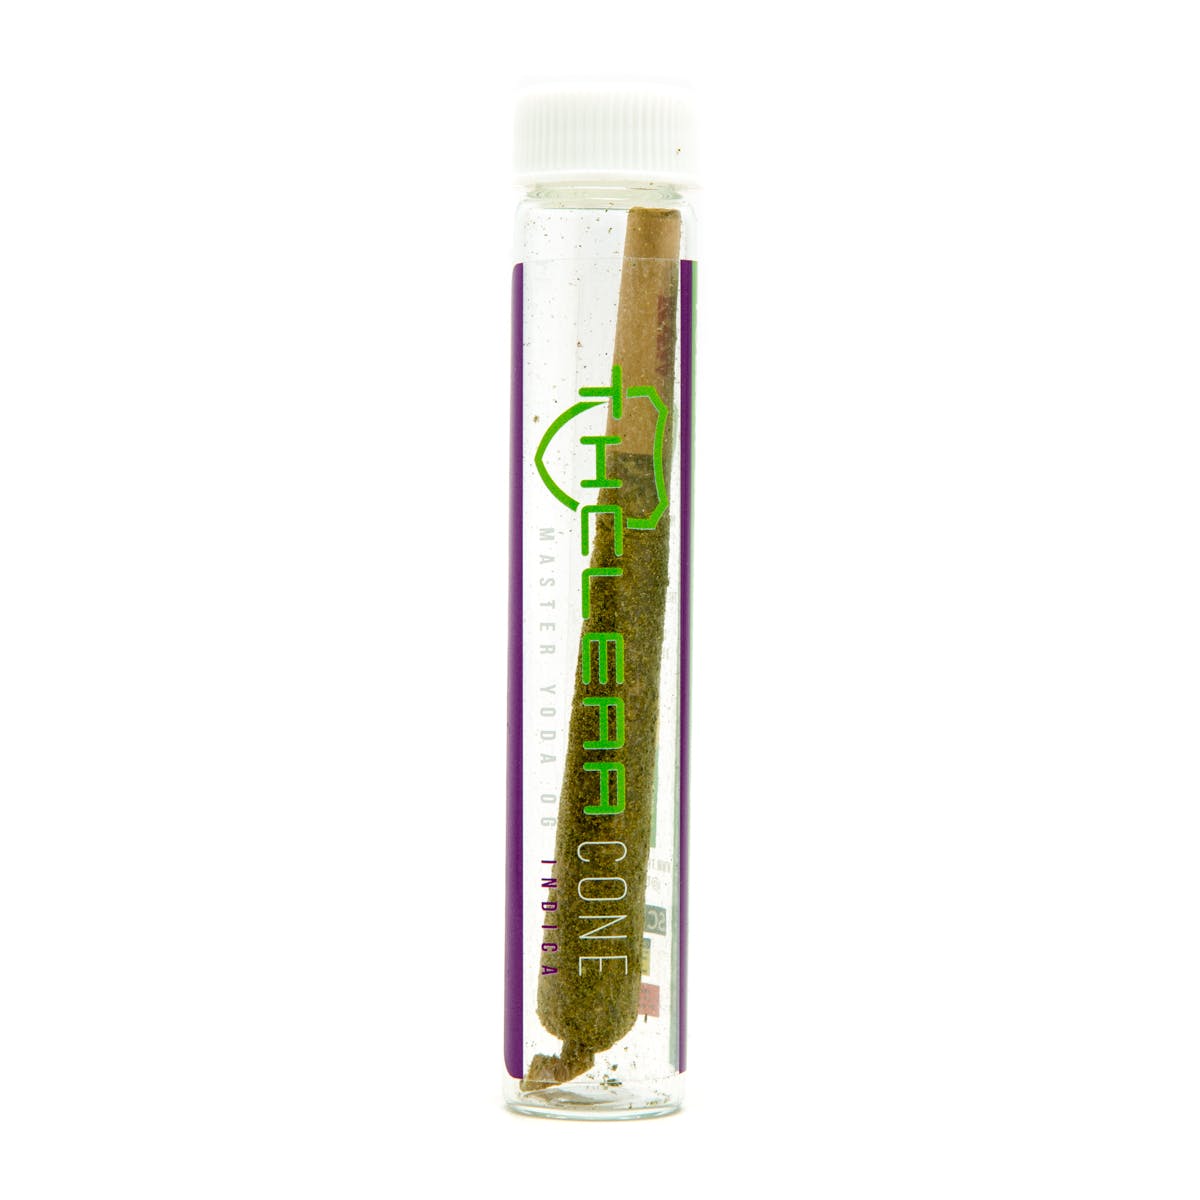 marijuana-dispensaries-holy-7th-heaven-in-los-angeles-pre-roll-cone-white-fire-og